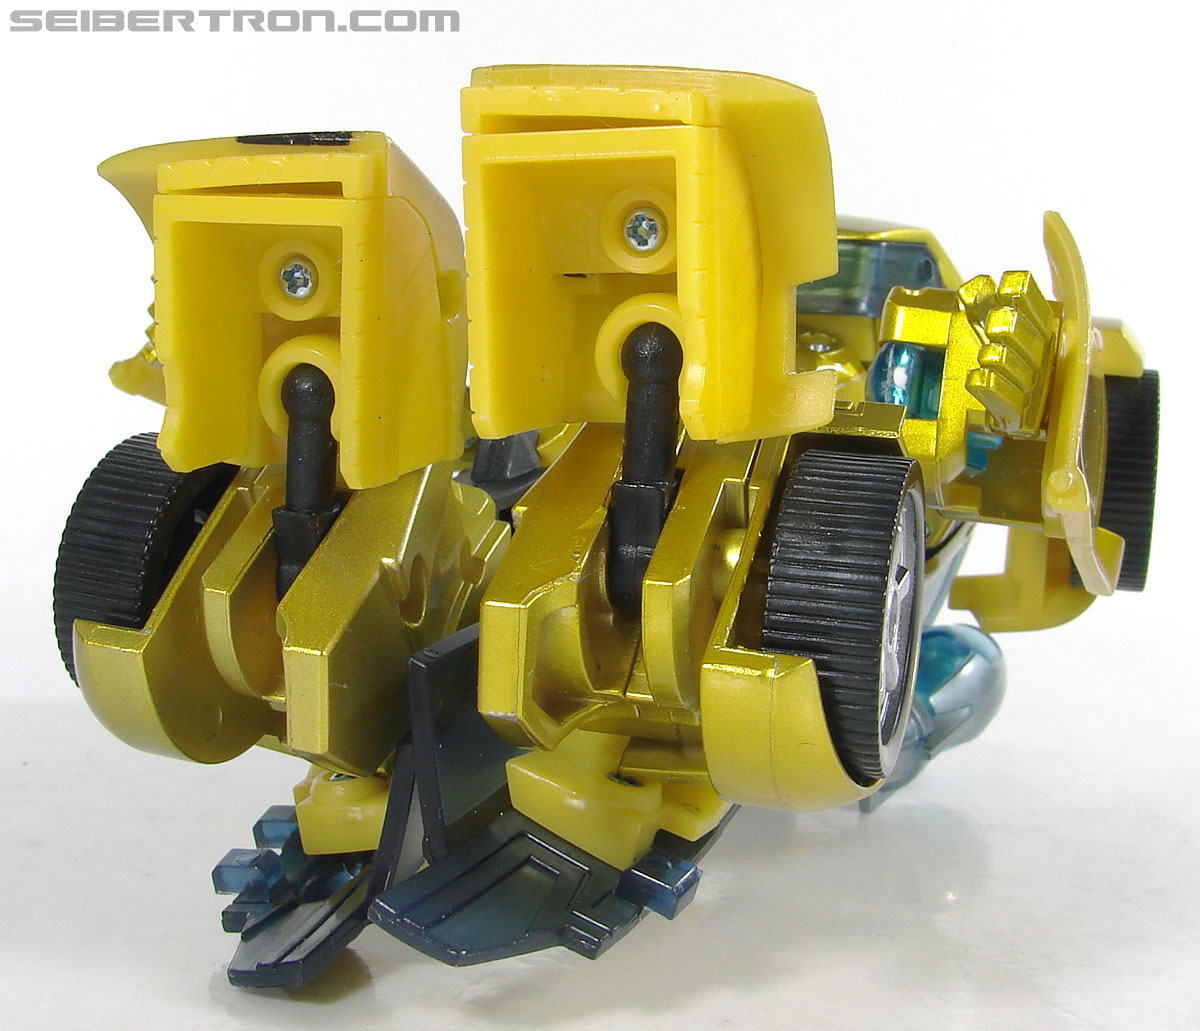 Transformers Animated Bumblebee (Image #63 of 115)